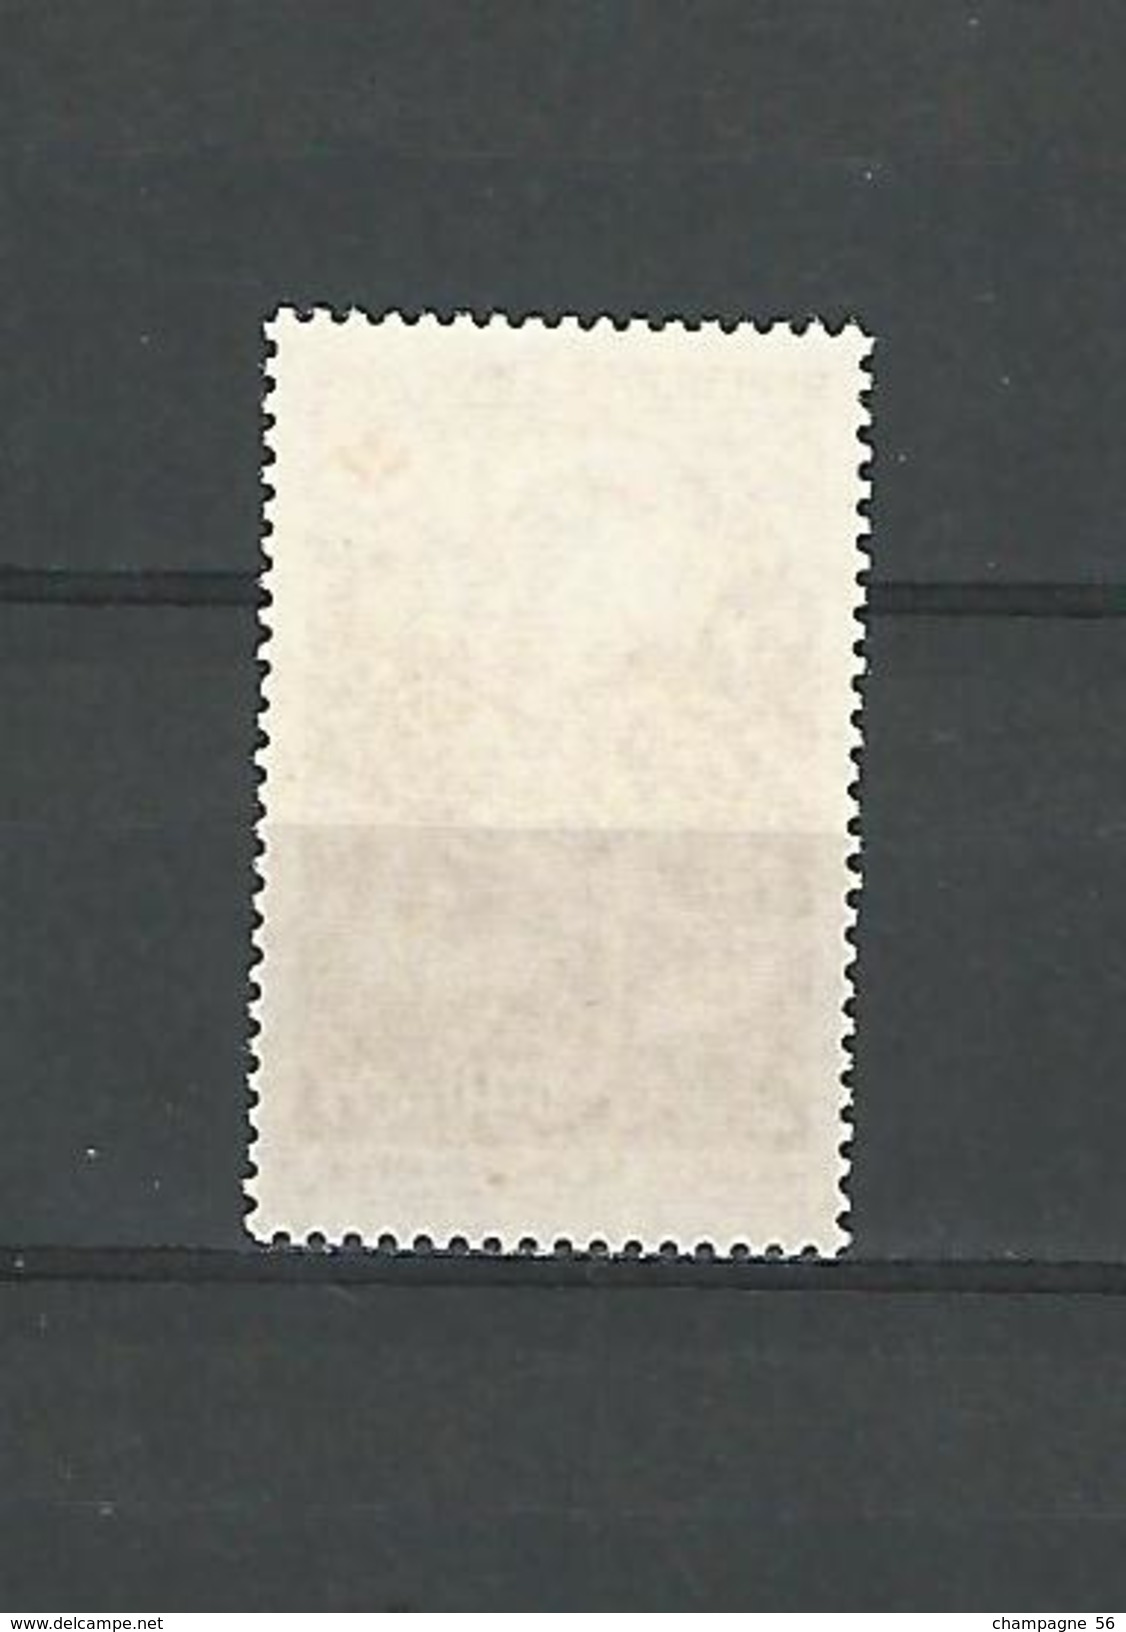 1970 N° 1662 L ANGE AU FOUET    CROIX ROUGE OBLITERE GOMME - Used Stamps